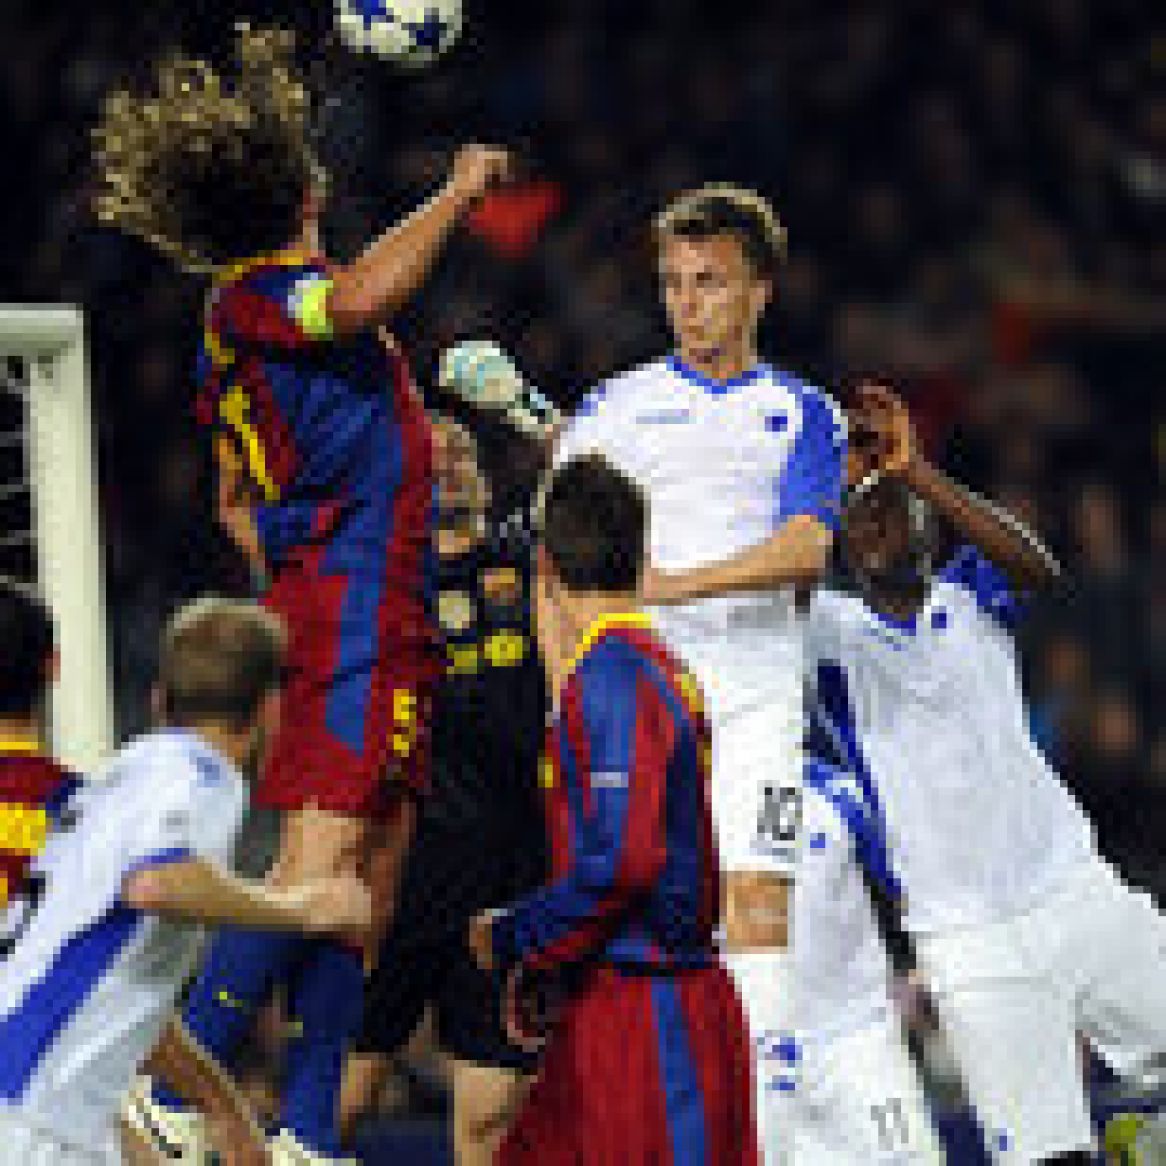 FCK go down fighting in the Nou Camp